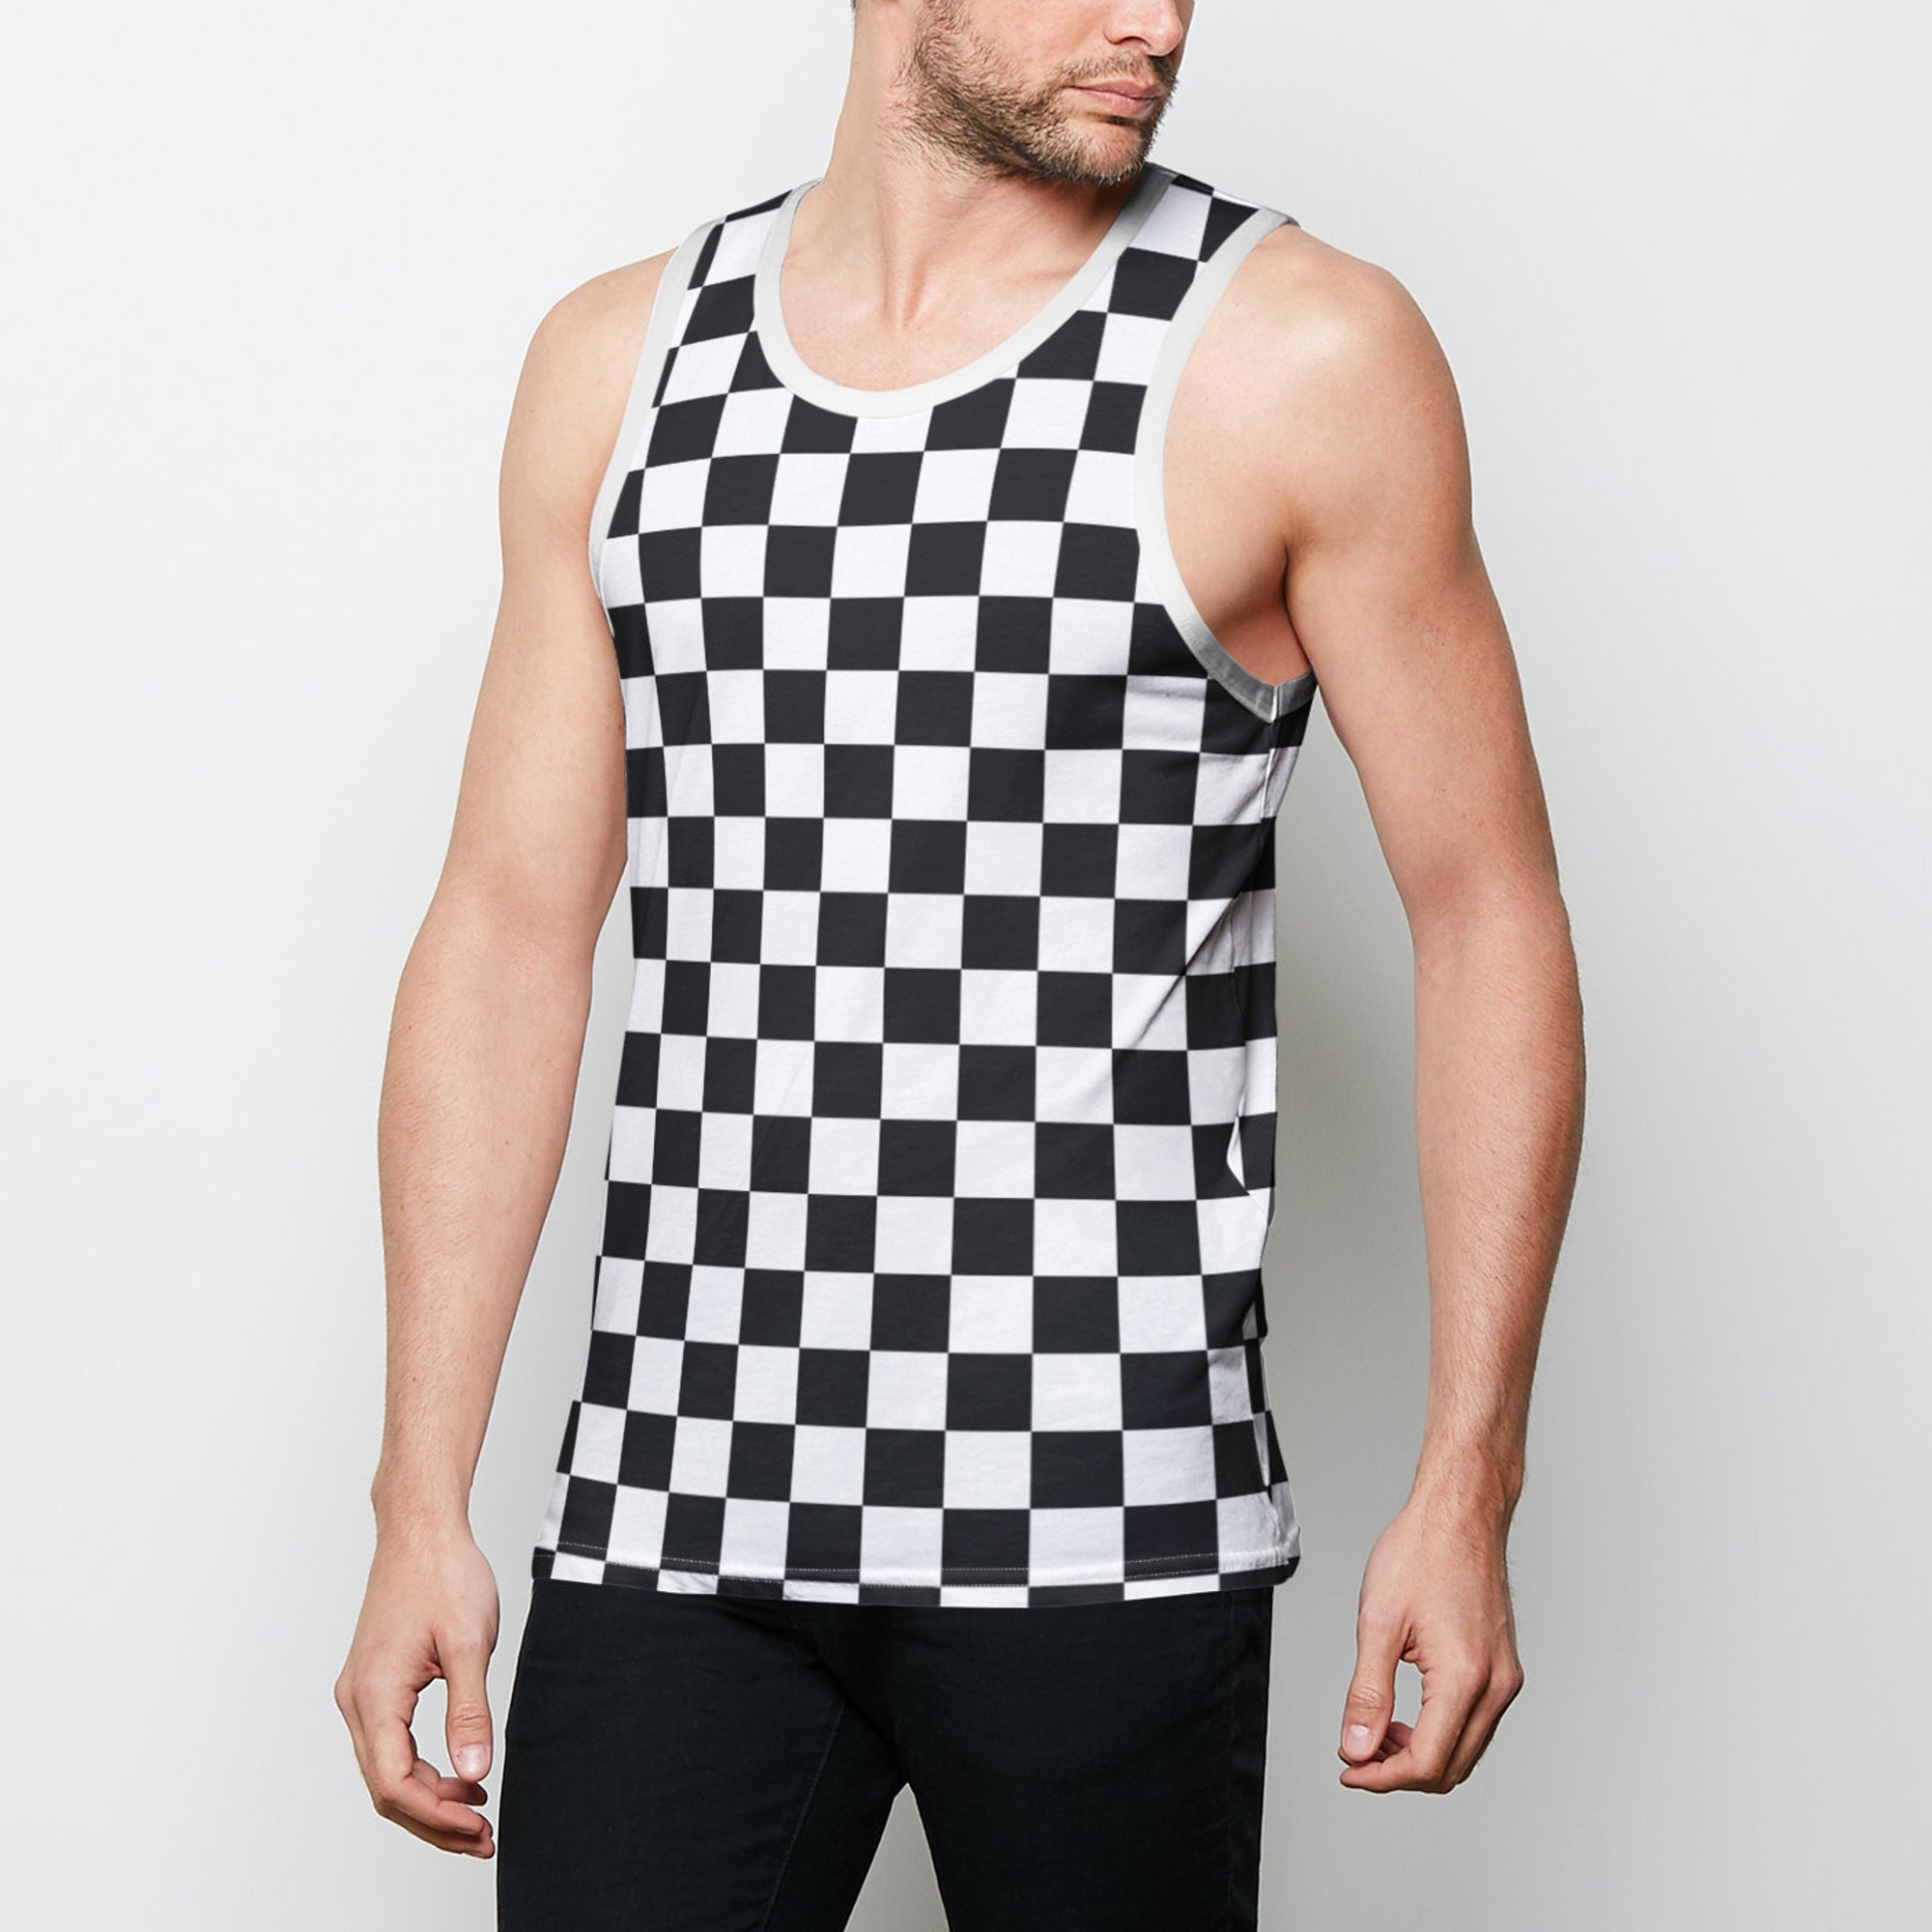 Discover Checkered Rave 3D Tank Top